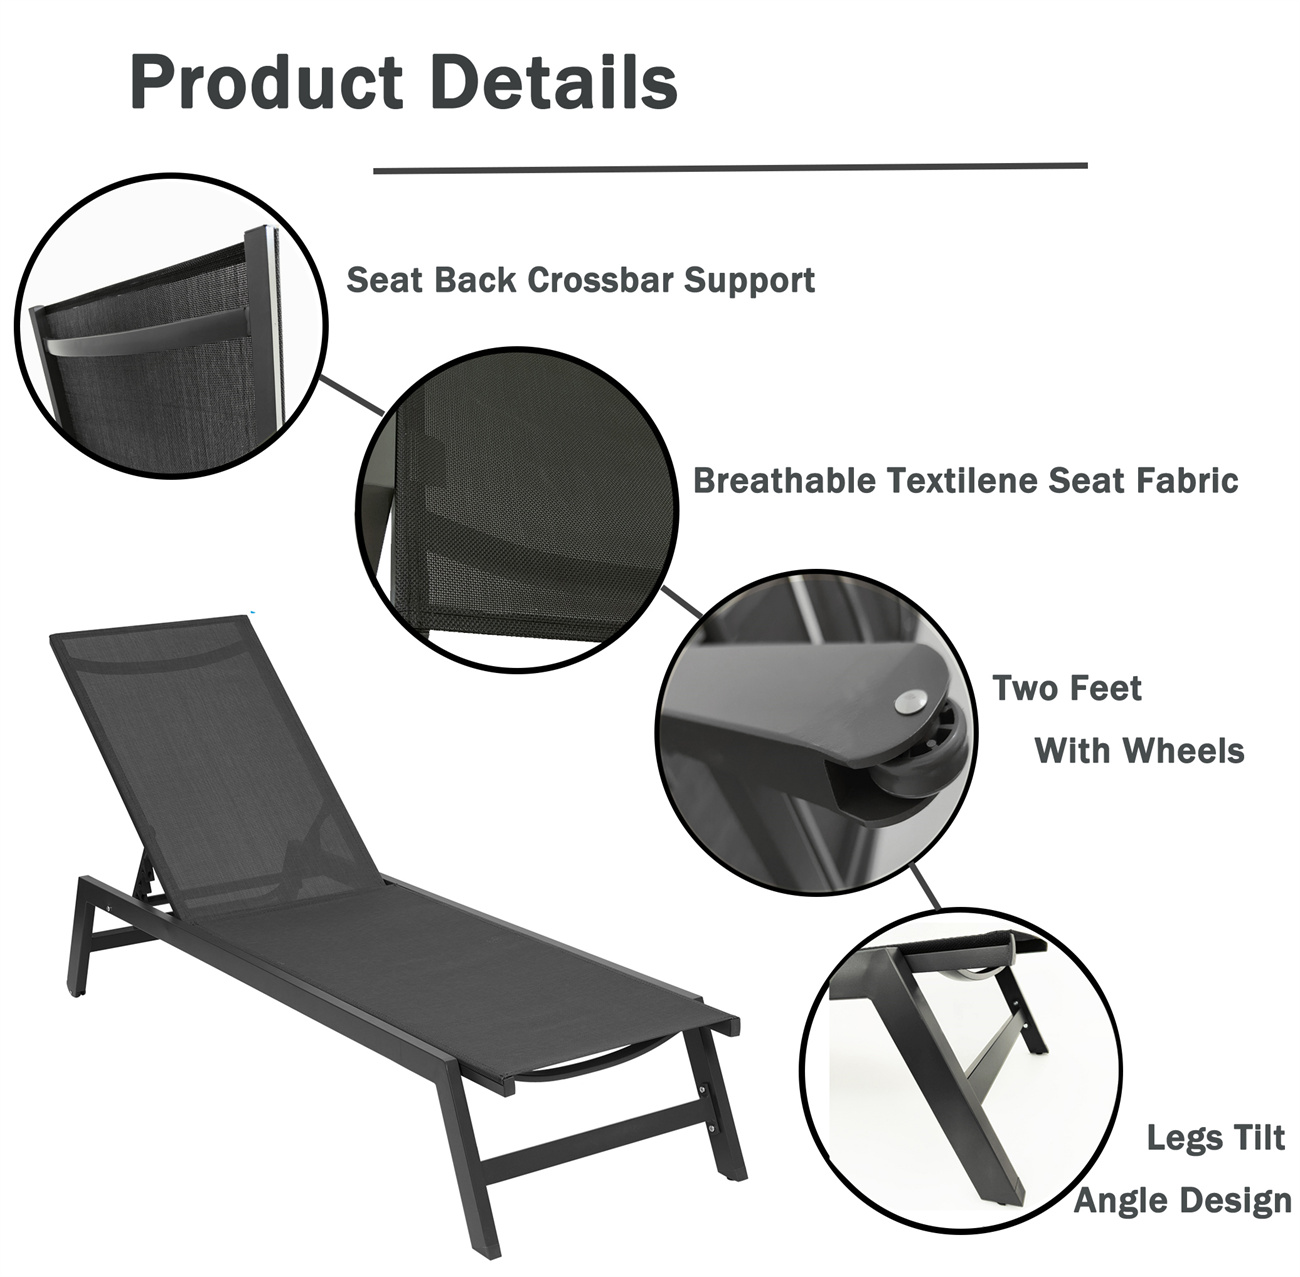 Outdoor Chaise Lounge Chair with Wheels, Five-Position Adjustable Aluminum Patio Lounge Chair Set, Sunbathing Reclining Chair for Beach, Yard, Patio, Pool, Home Office Sitting Area, Black - image 2 of 7